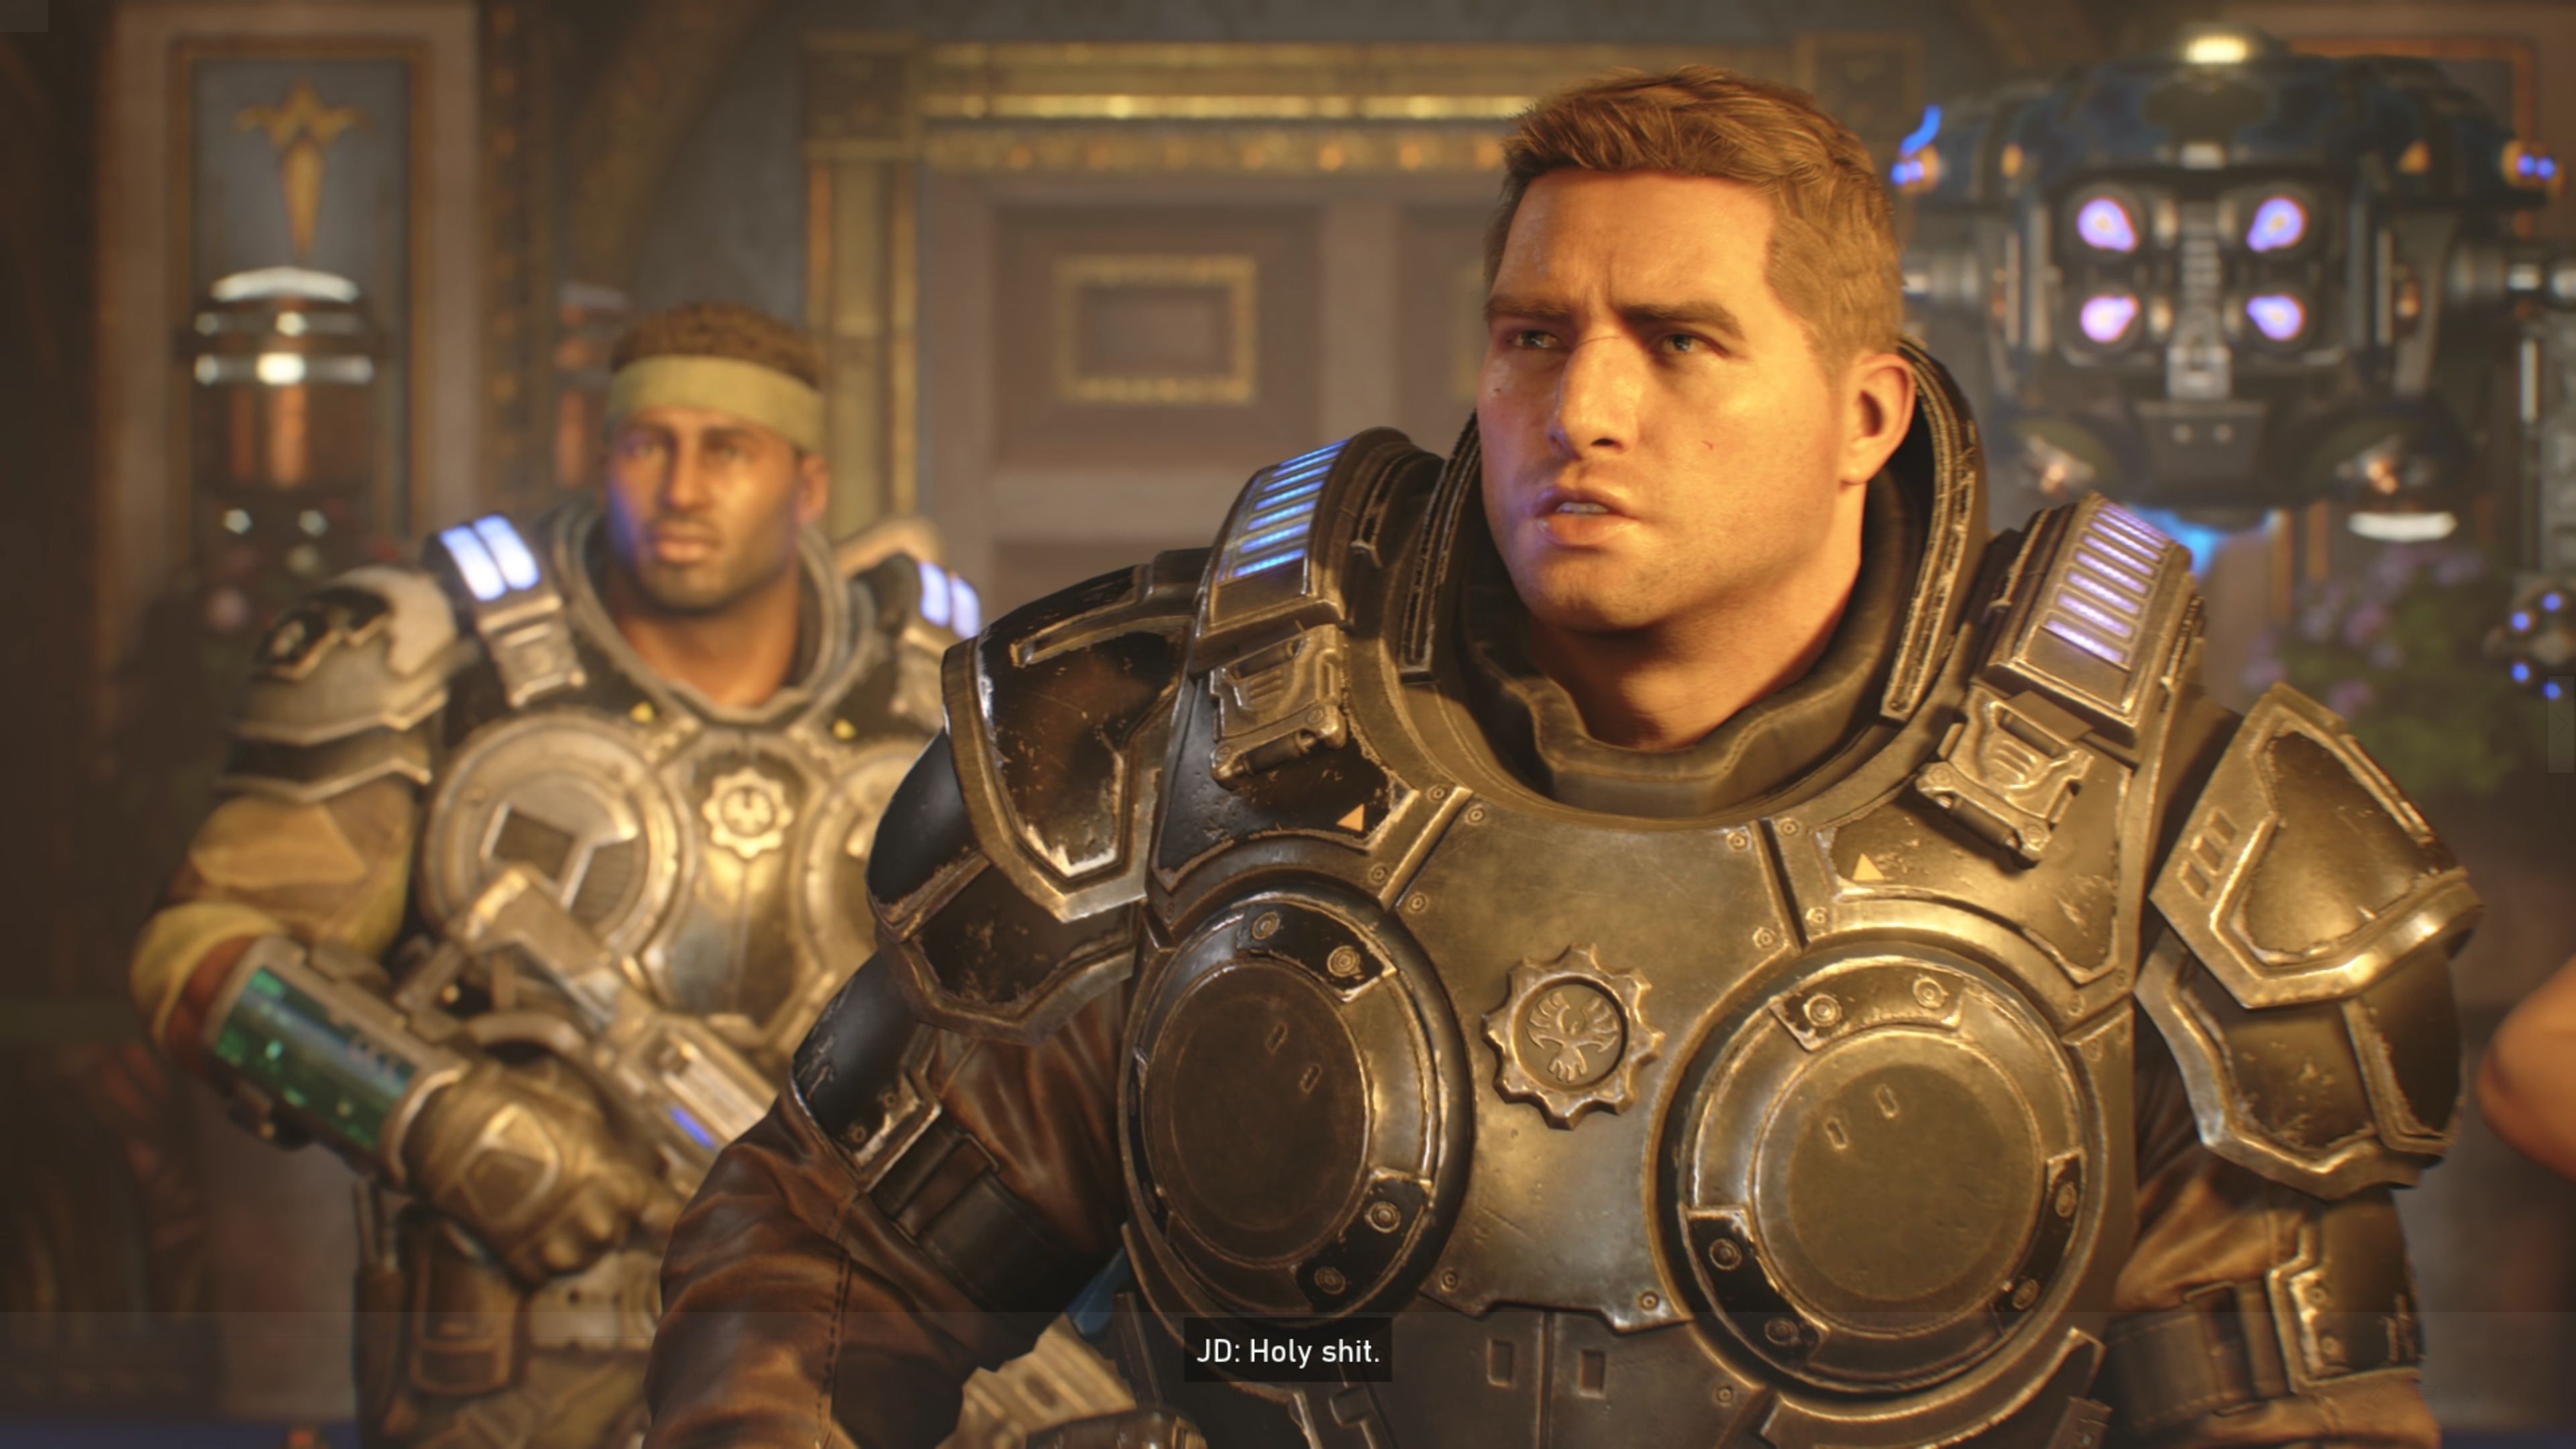 Gears 5 free, Steam and Windows 10 access, PC gaming, Limited-time offer, 3840x2160 4K Desktop